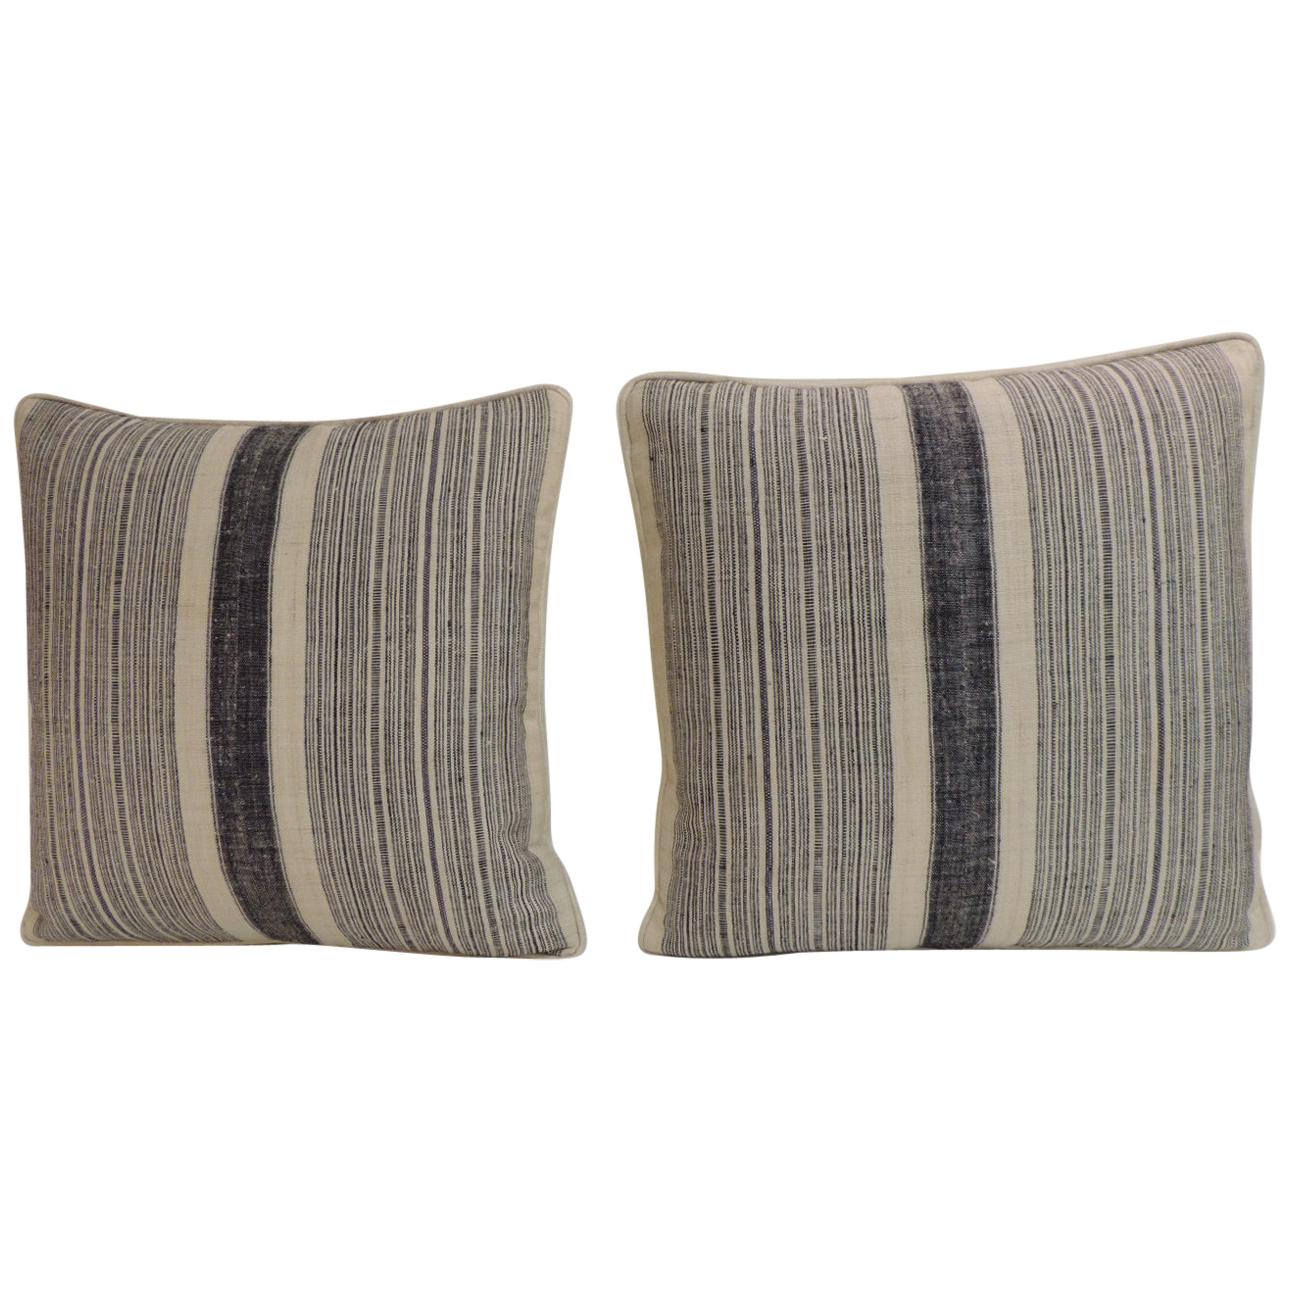 Pair of Vintage Chinese Homespun Blue and Natural Stripes Decorative Pillows